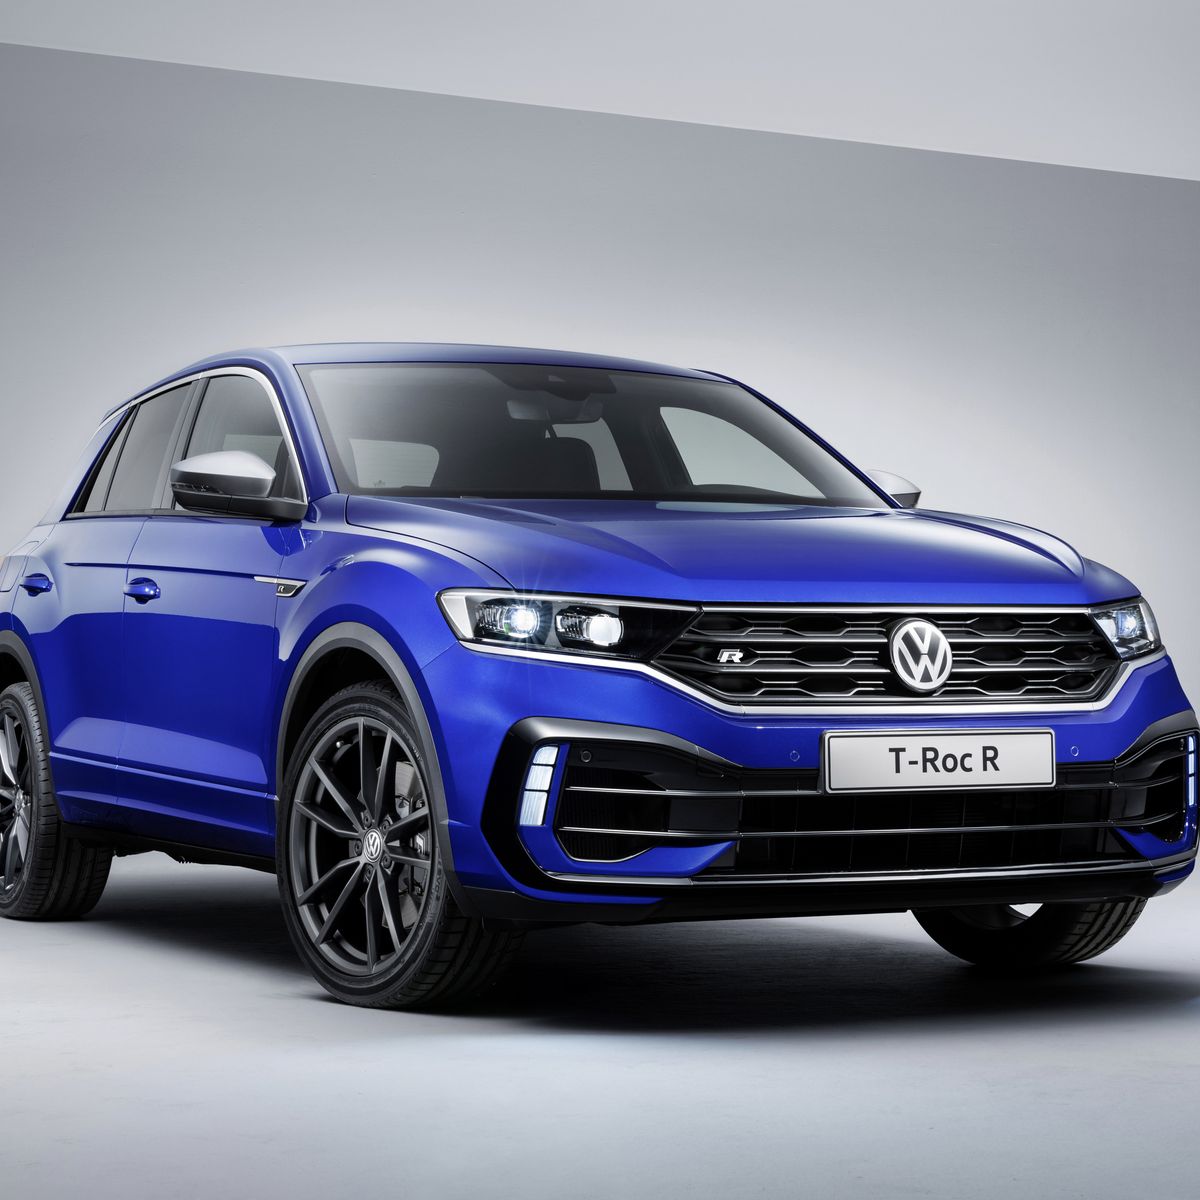 Volkswagen T-Roc R – High-Performance Turbocharged Crossover